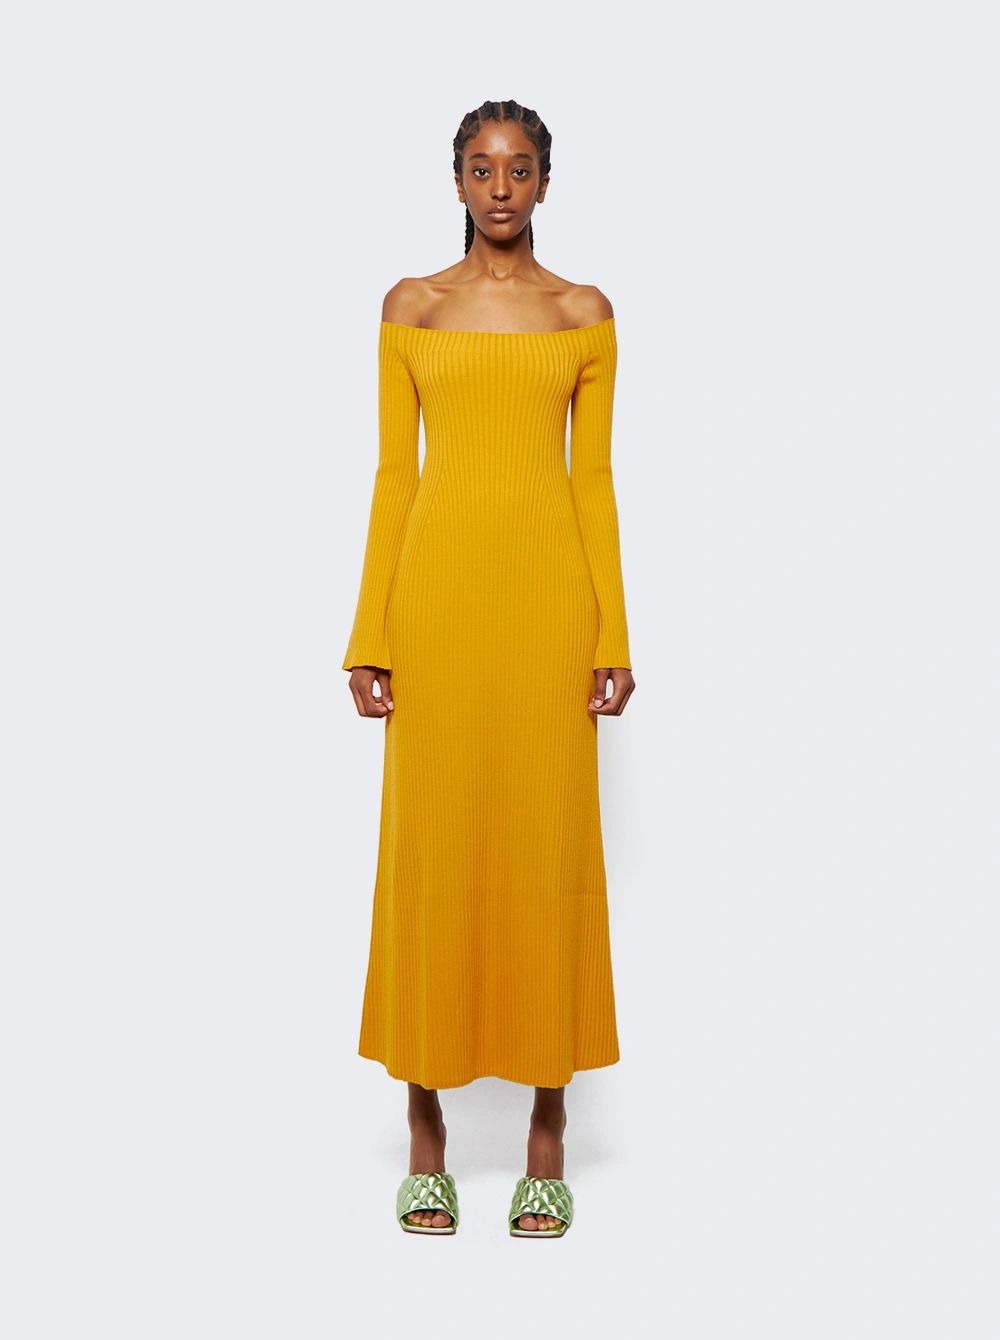 Ribbed Knit Midi Dress Sunlight Yellow | The Webster